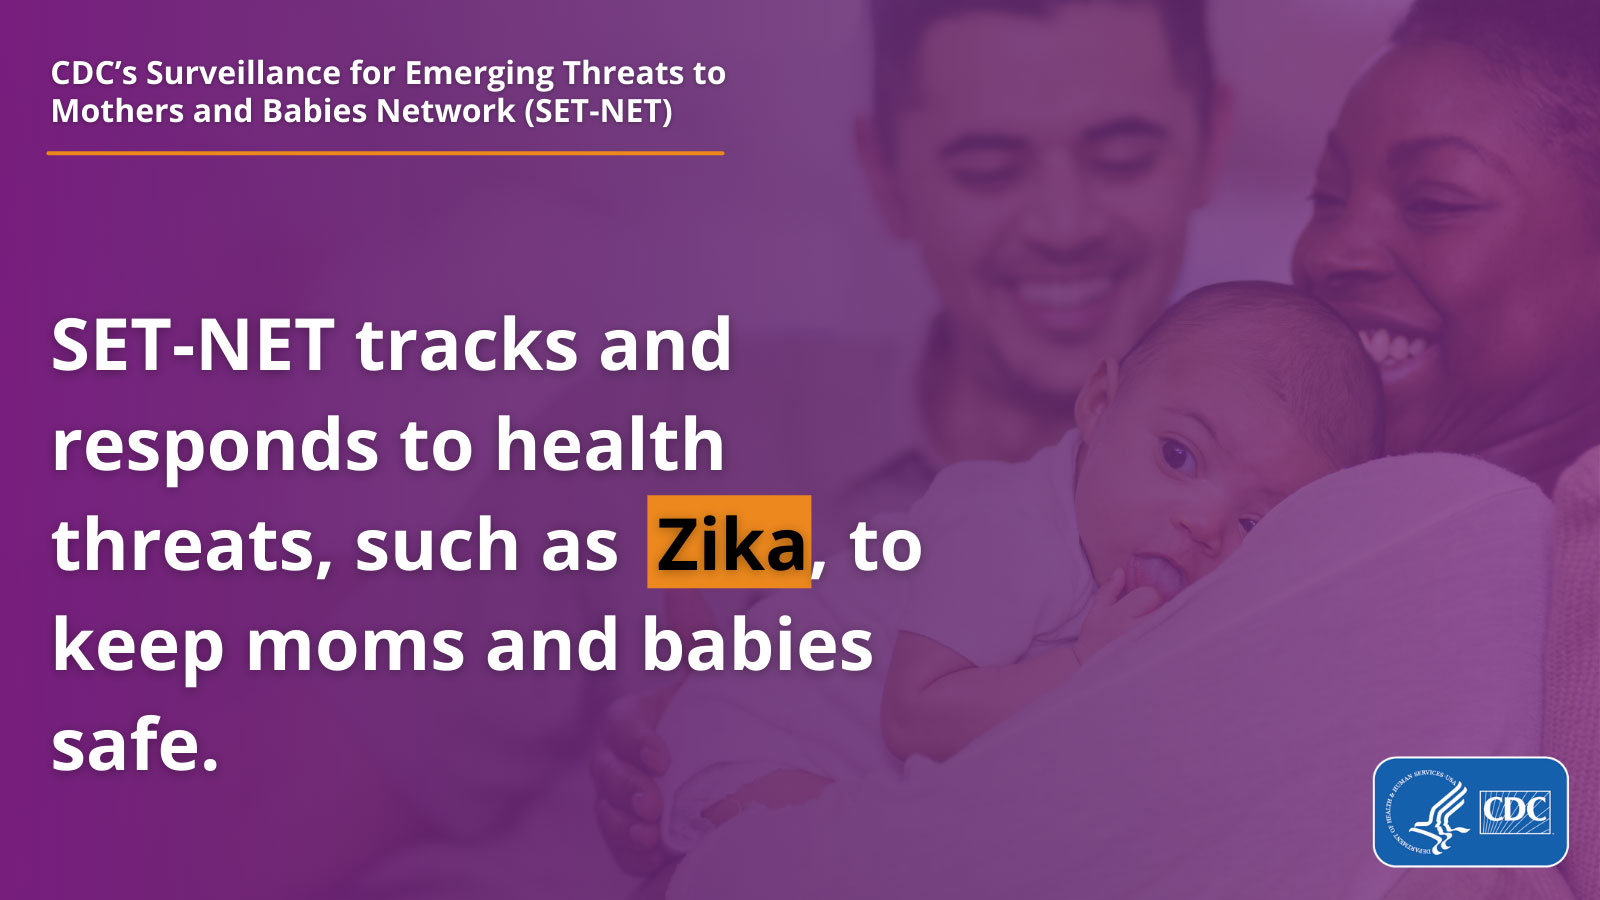 SET-NET tracks and responds to health threats, such as Zika, to keep moms and babies safe.